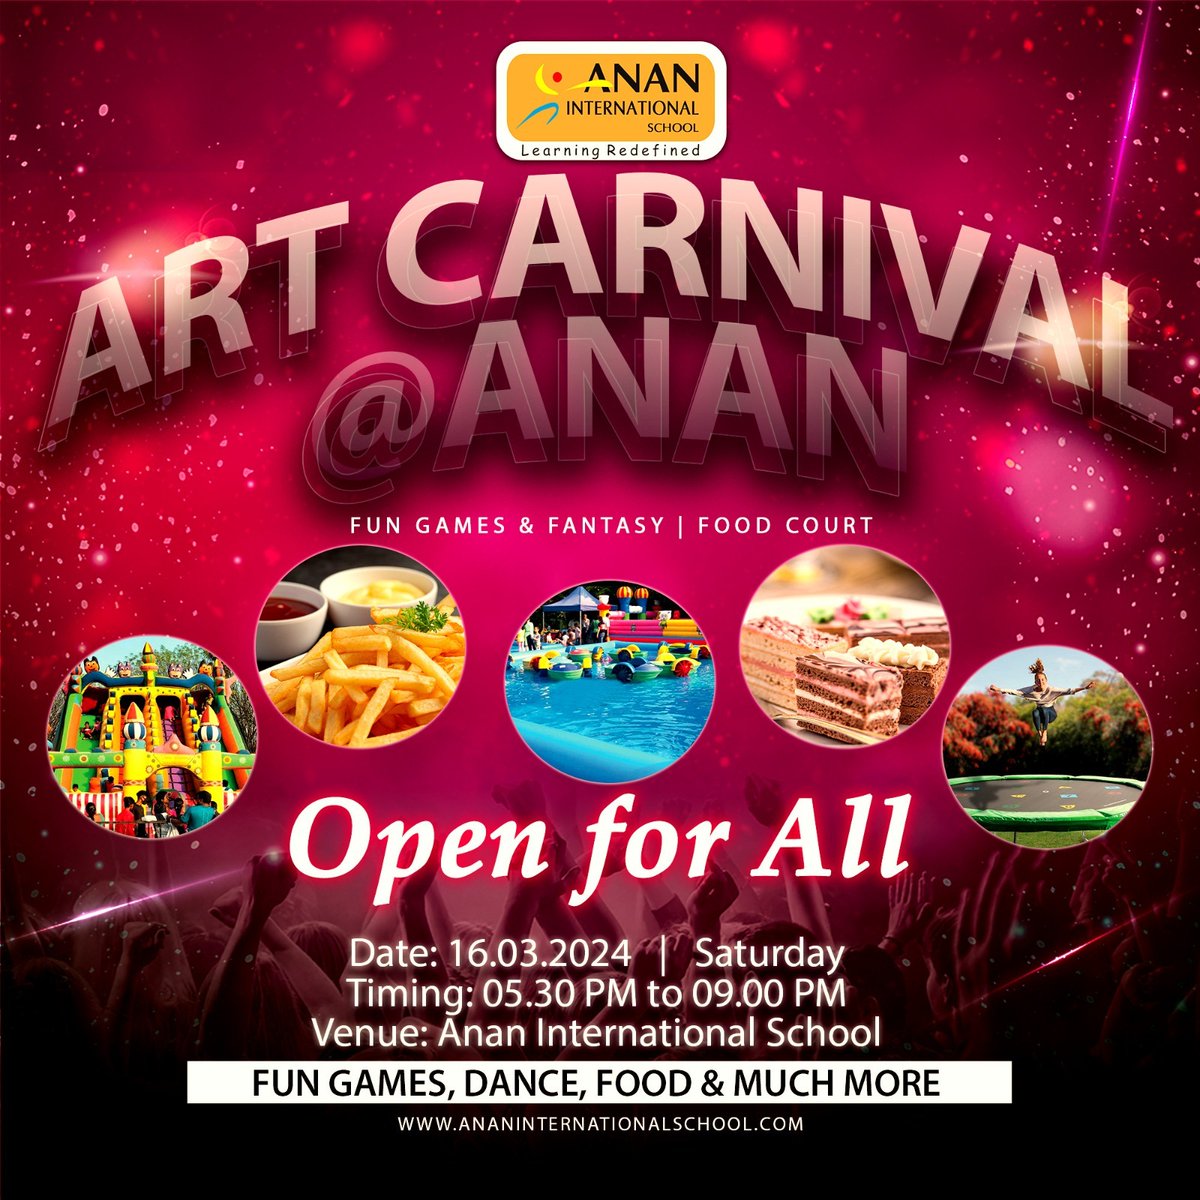 Step right up to our school's art #carnival for a day of #creativity and excitement! From #fungames to mouth-watering #food, get ready for a memorable experience you won't forget. #AnanInternationalSchool #artcarnival #carnival2024 #art #artwork #WelcomeAll #CreativeKids